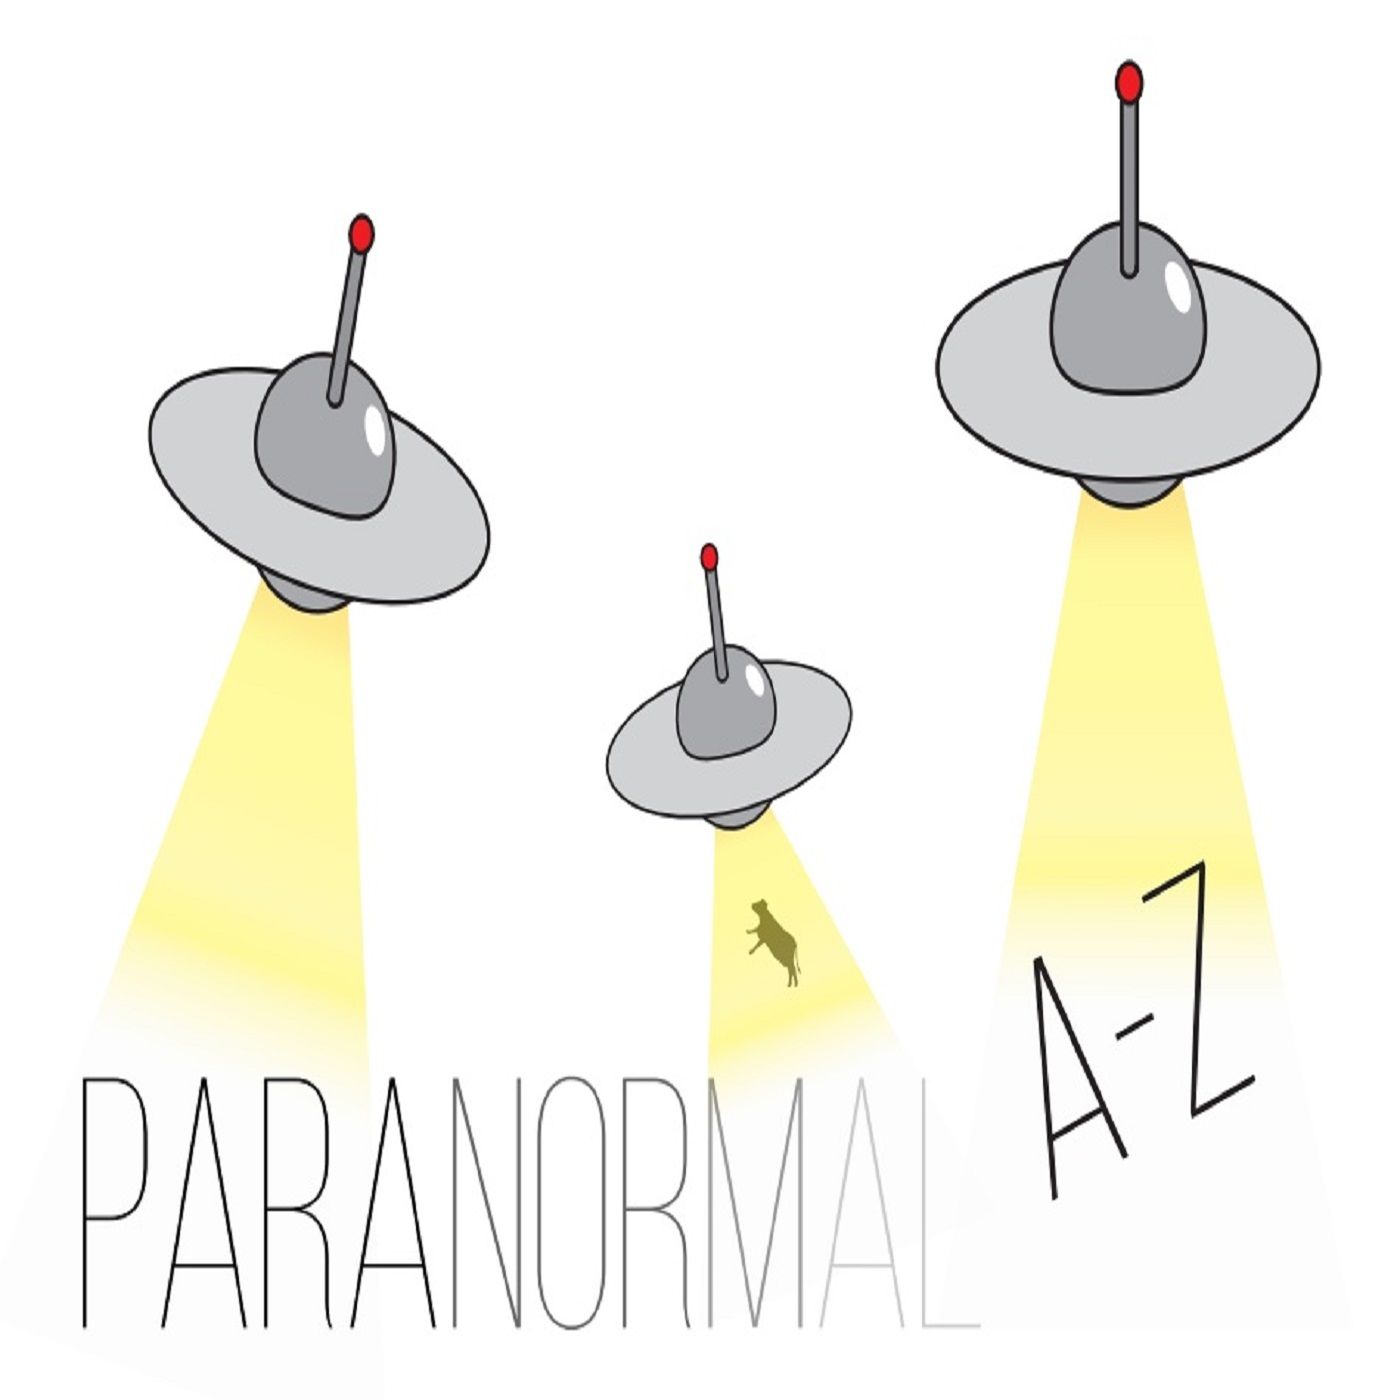 Paranormal A to Z